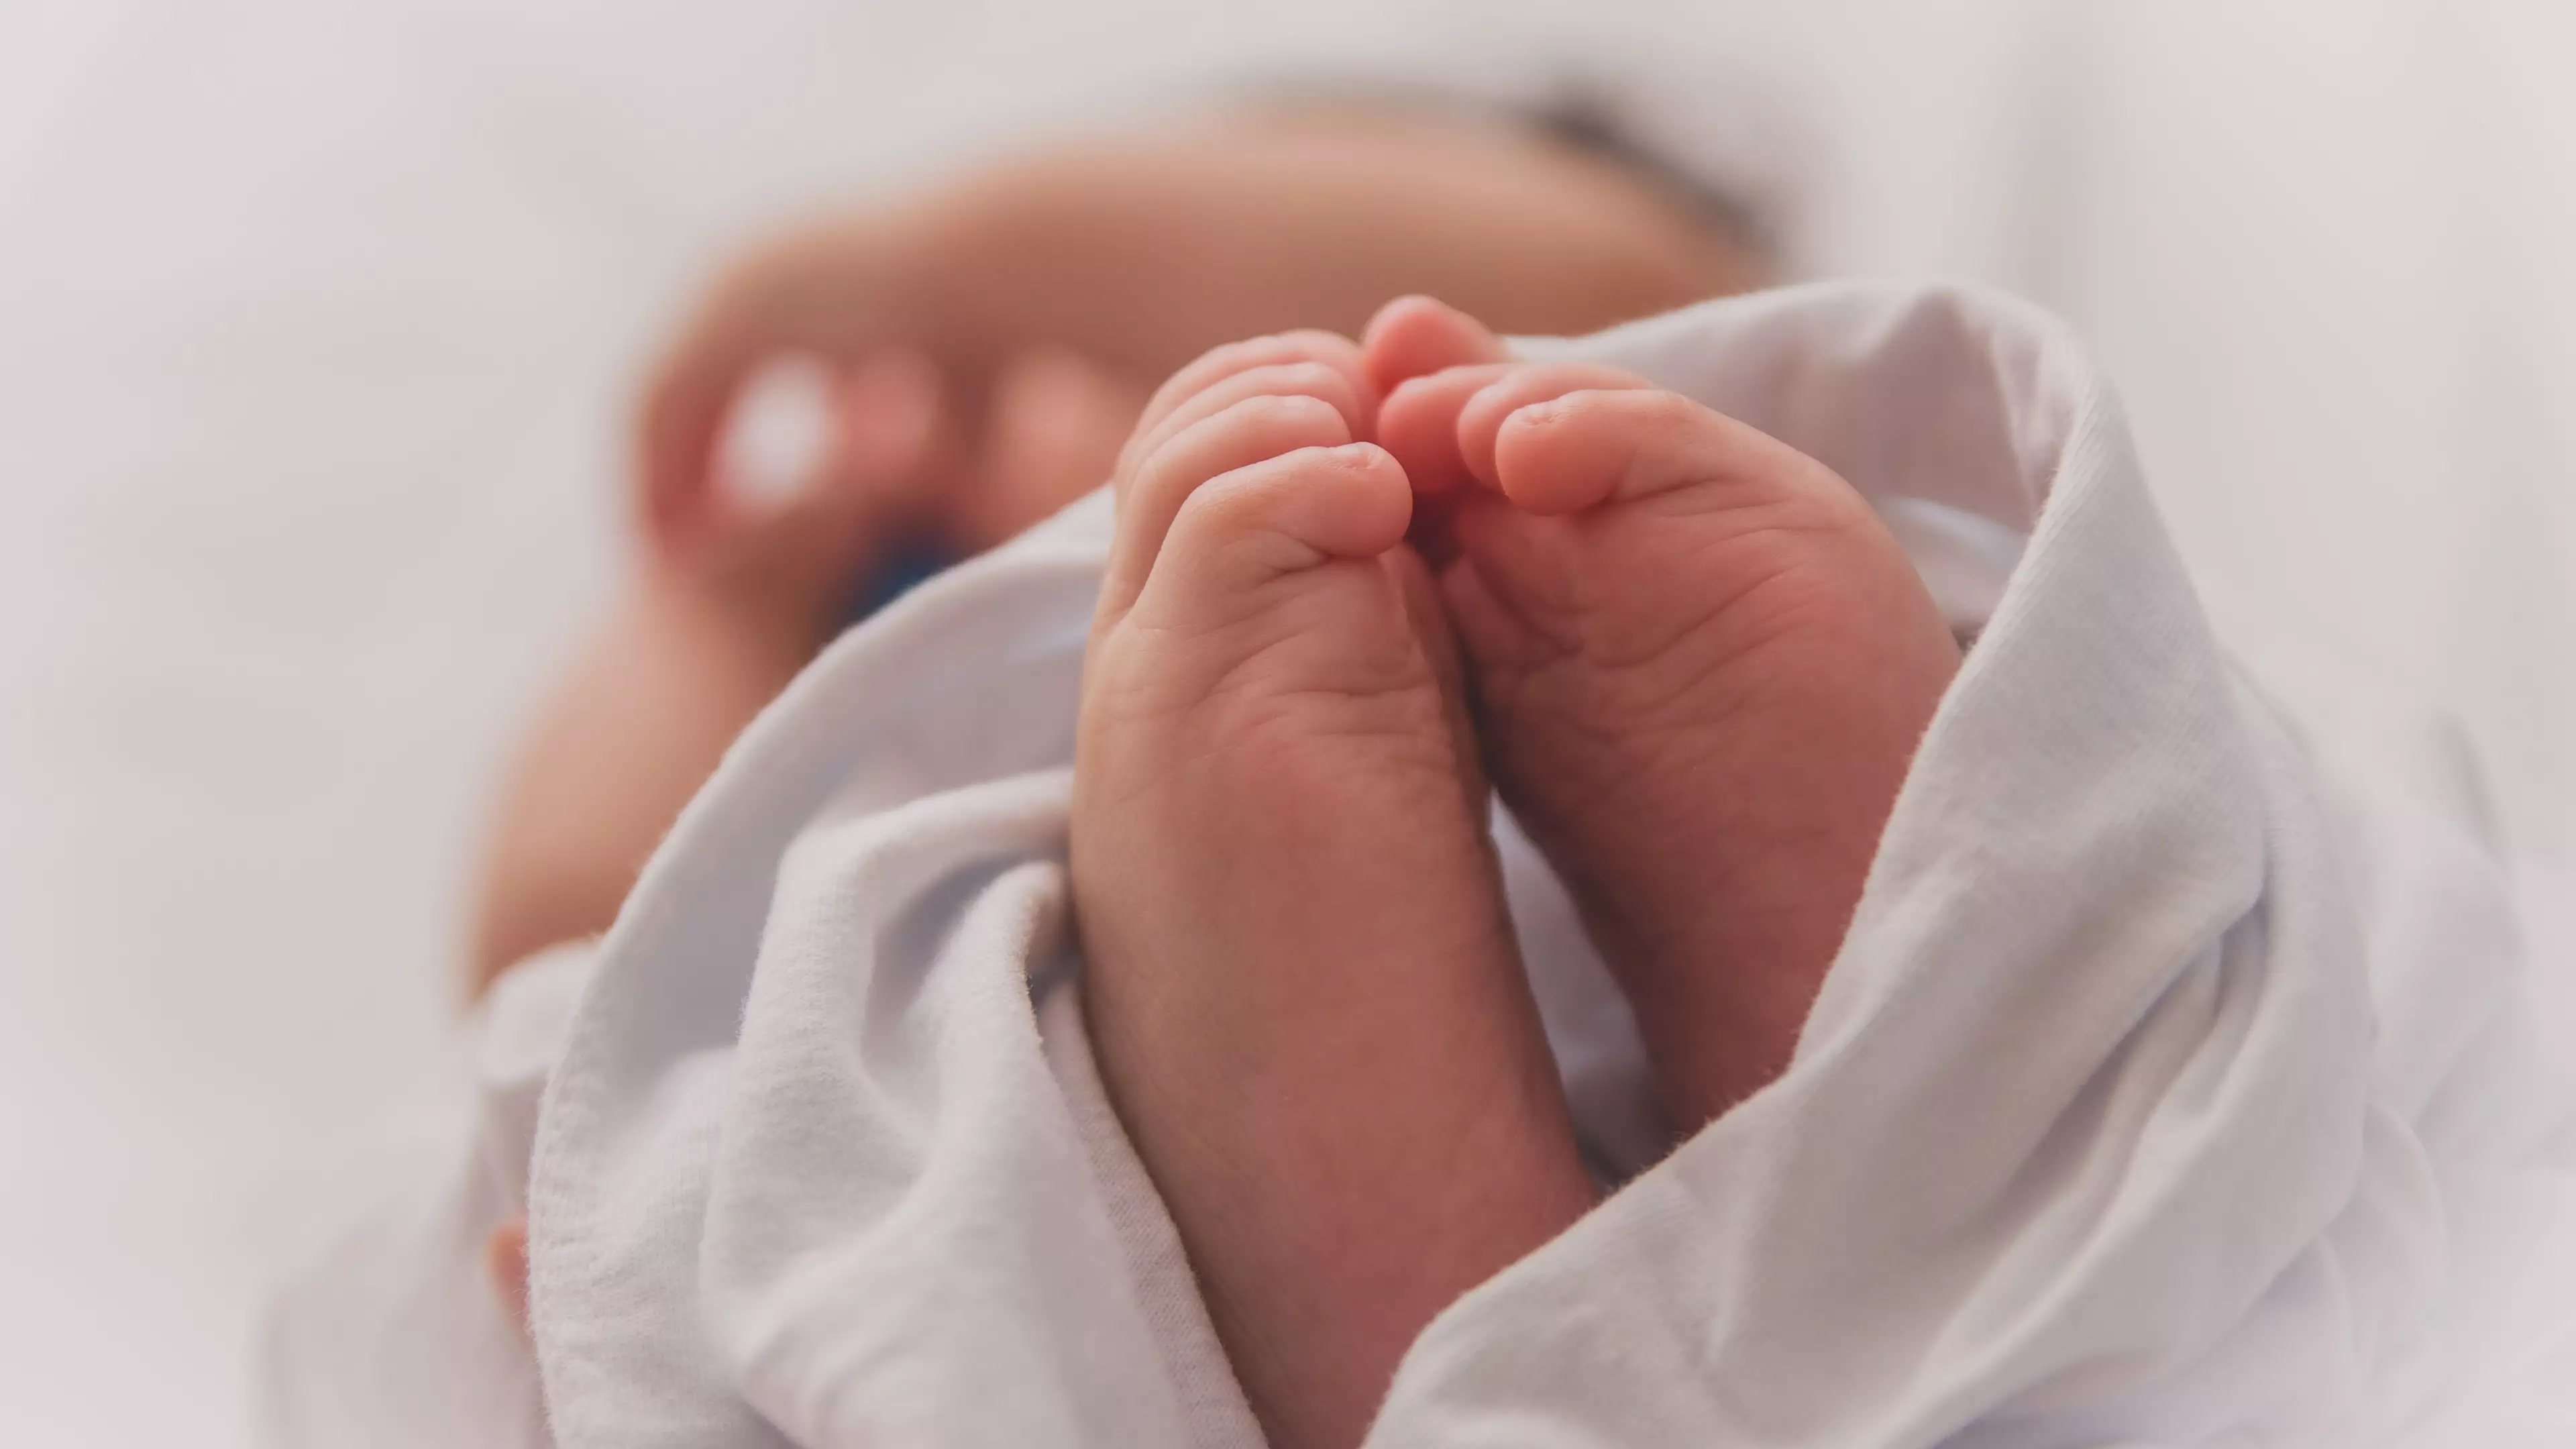 The Most Unique Baby Names Of 2020 Have Been Revealed